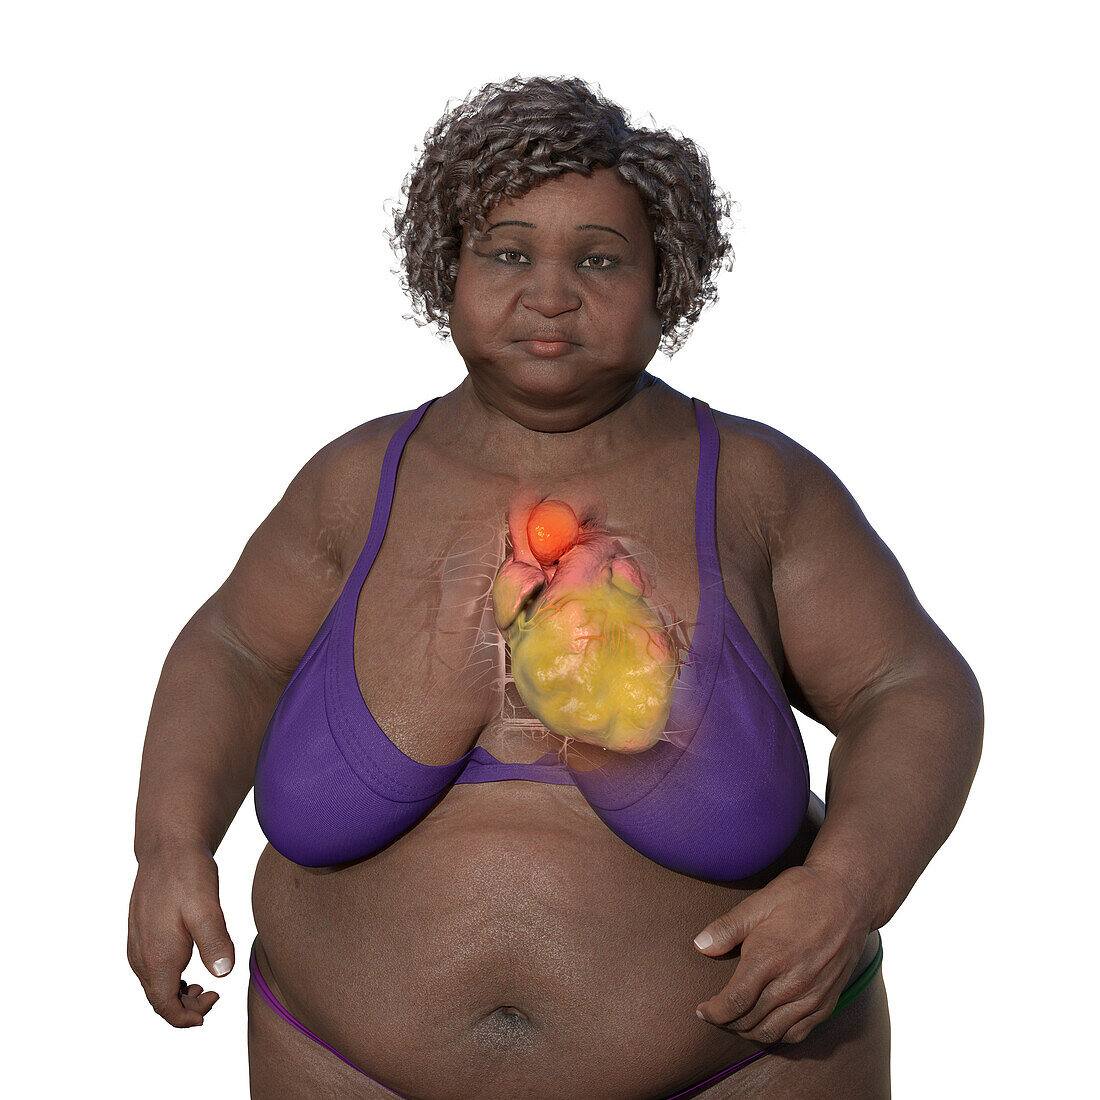 Obese woman with ascending aortic aneurysm, illustration